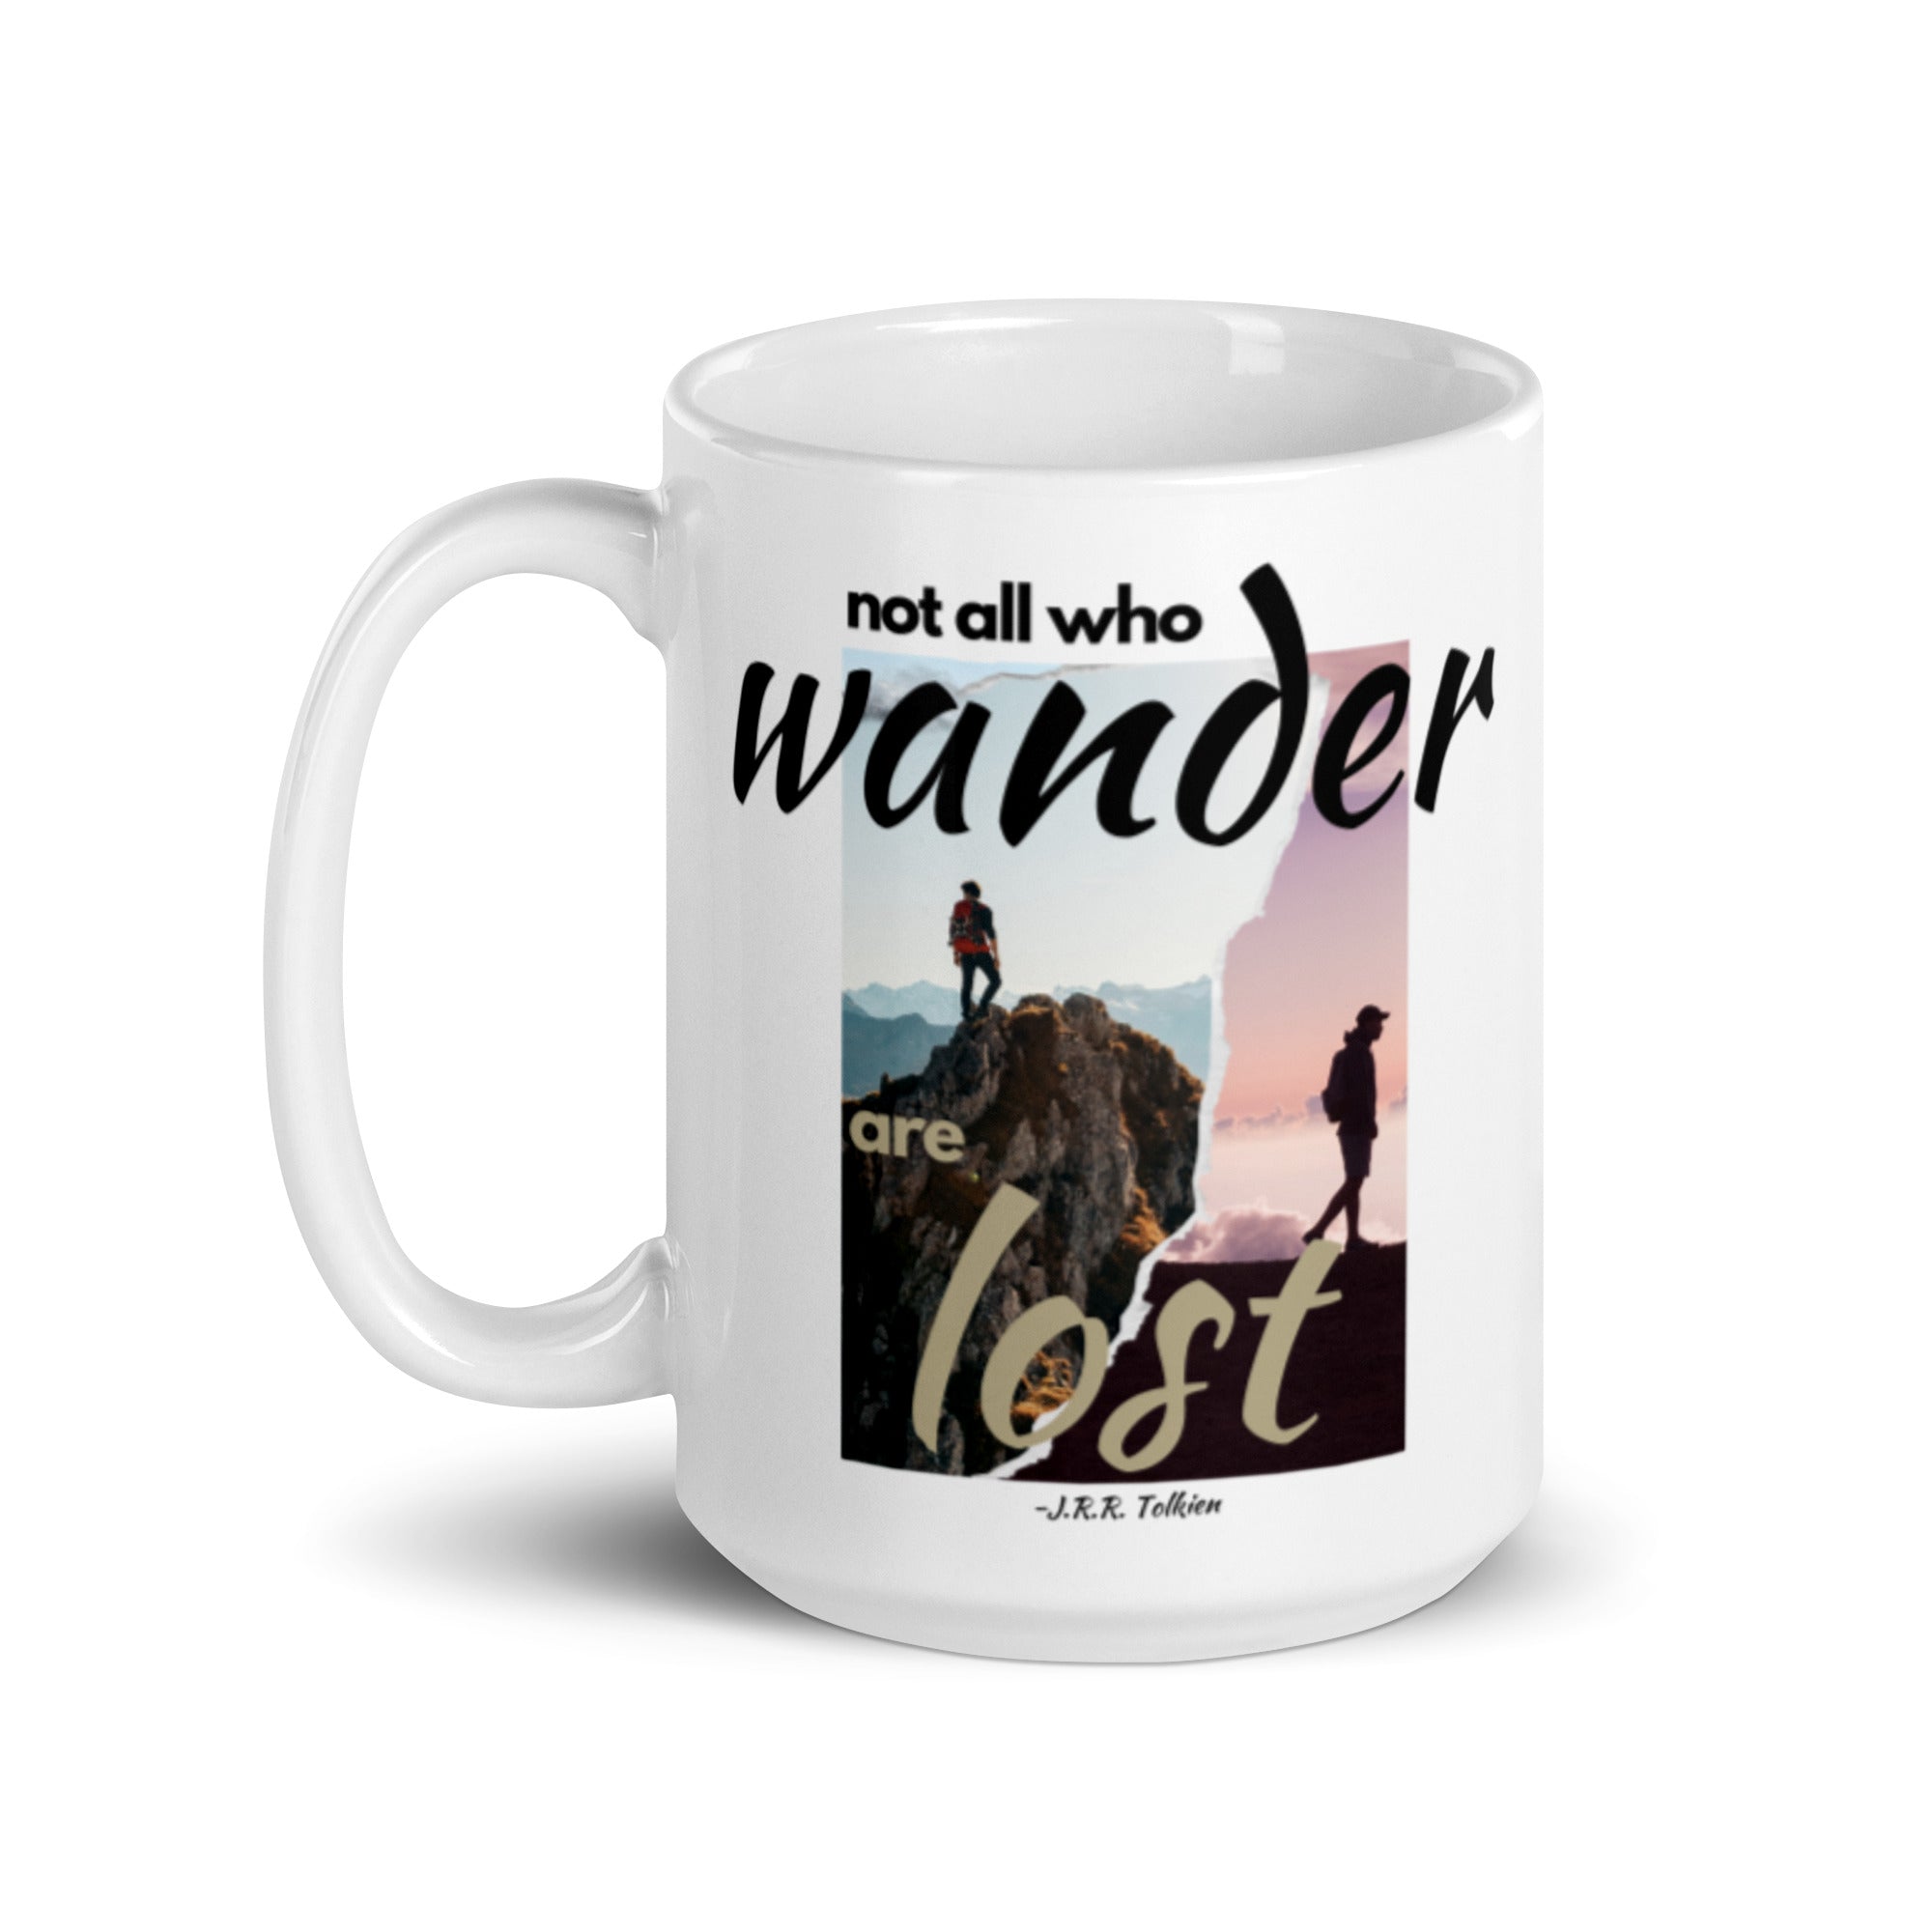 traveler coffee mug gift not all who wander are lost